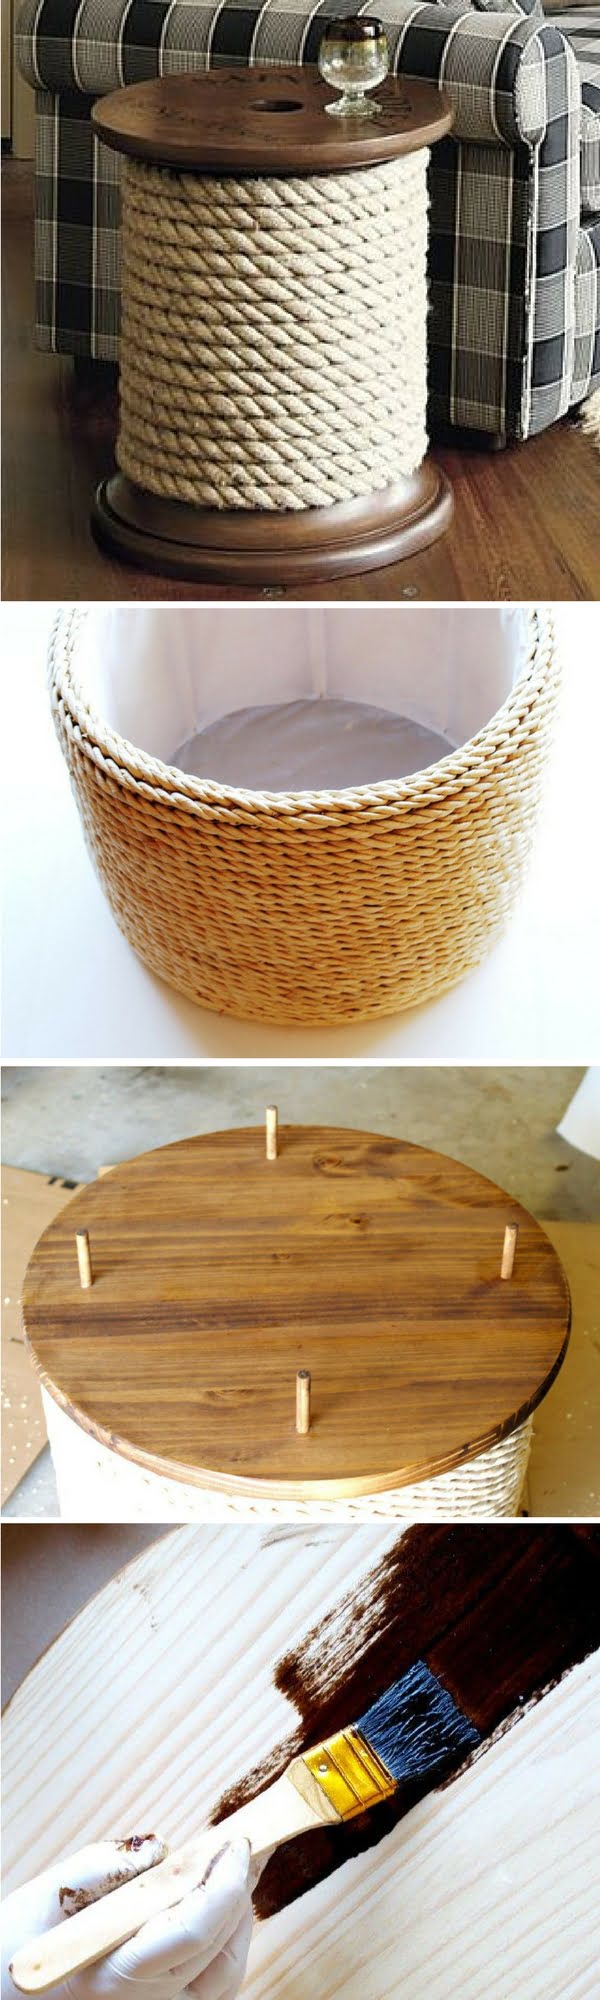 18 Easy DIY Sofa Side Tables You Can Build on a Budget - Check out the tutorial how make a DIY spool sofa side table